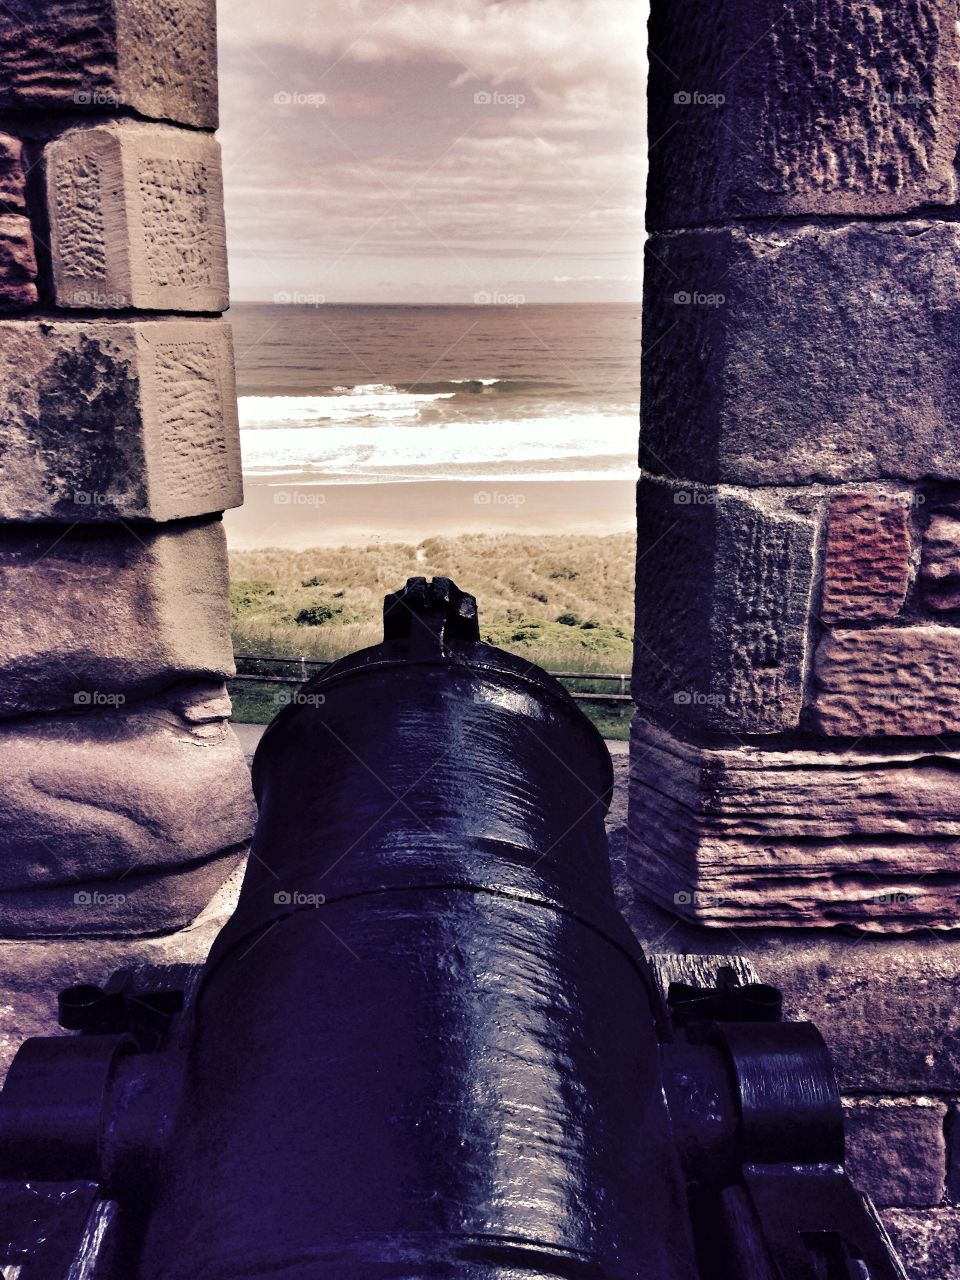 Cannon. Castle turret, looking out to sea